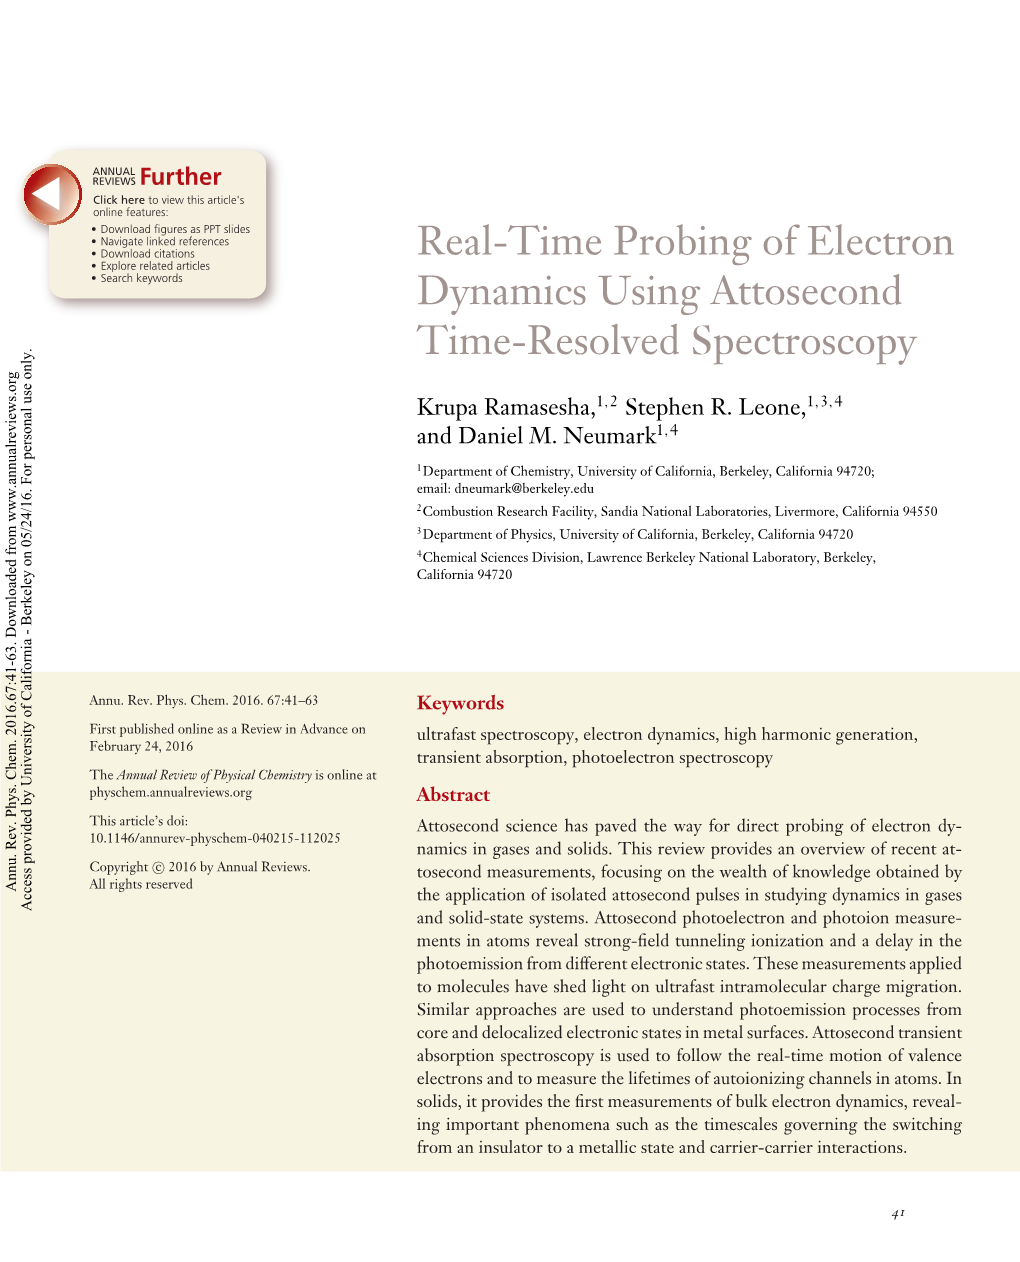 Real-Time Probing of Electron Dynamics Using